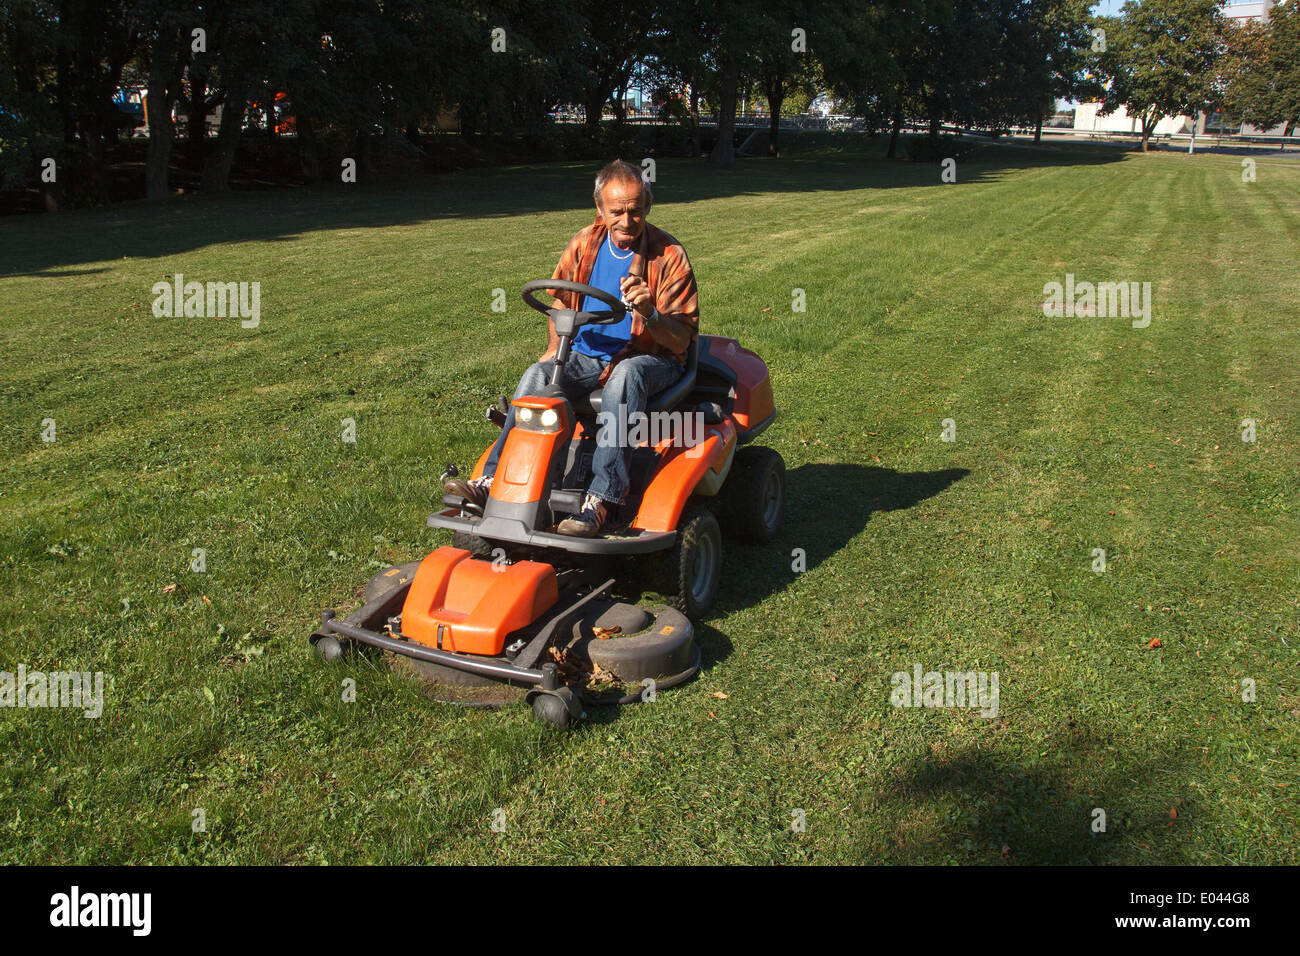 Ride-on lawn mower cutting grass. Stock Photo